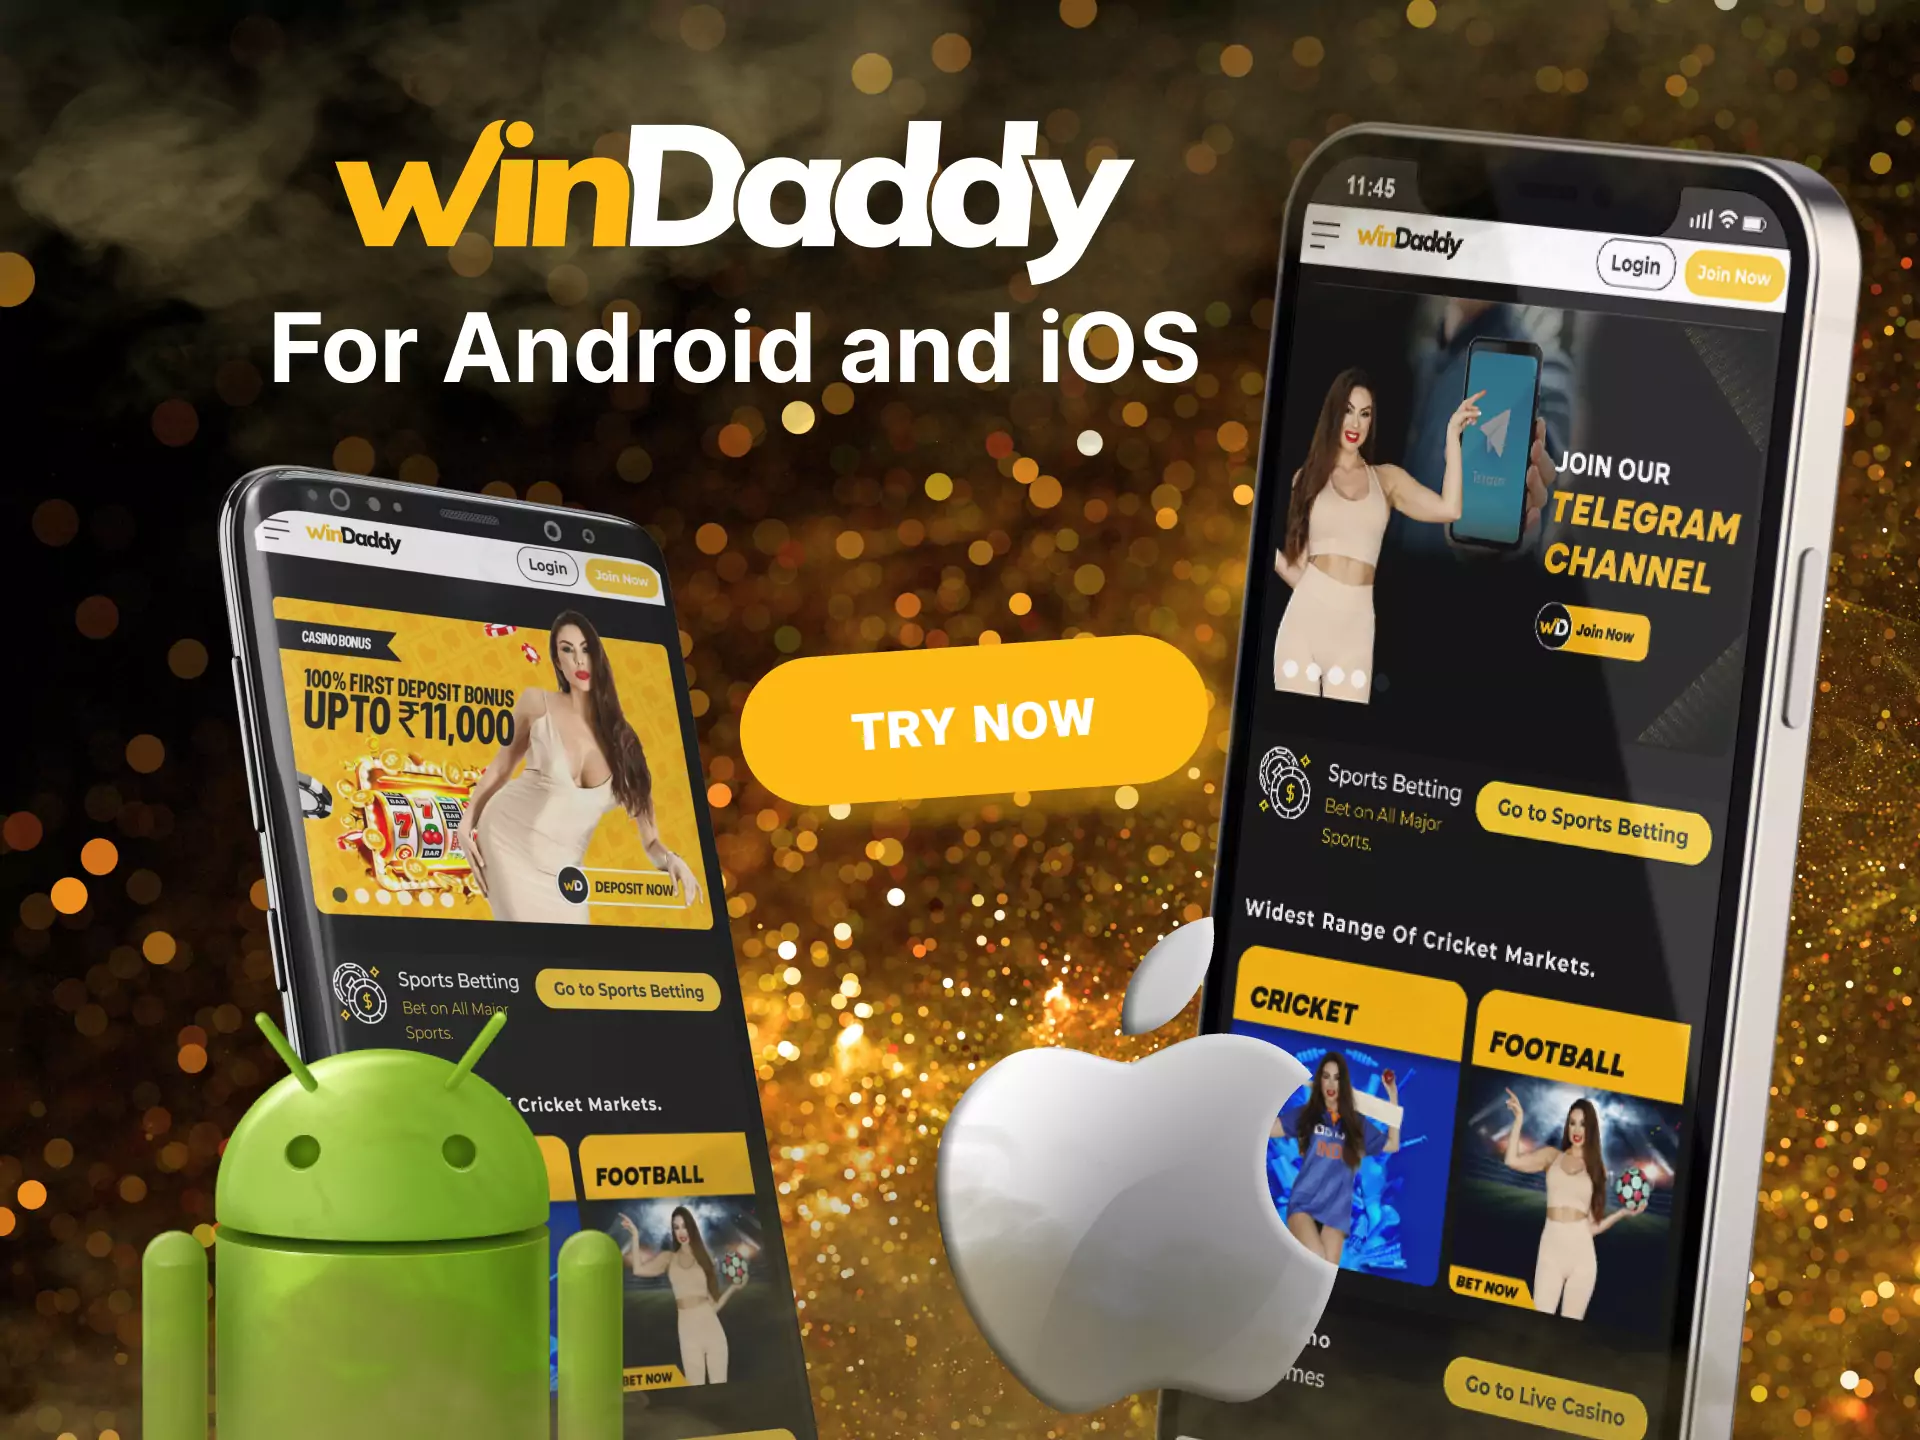 Register with Windaddy and play on any Android or iOS device.